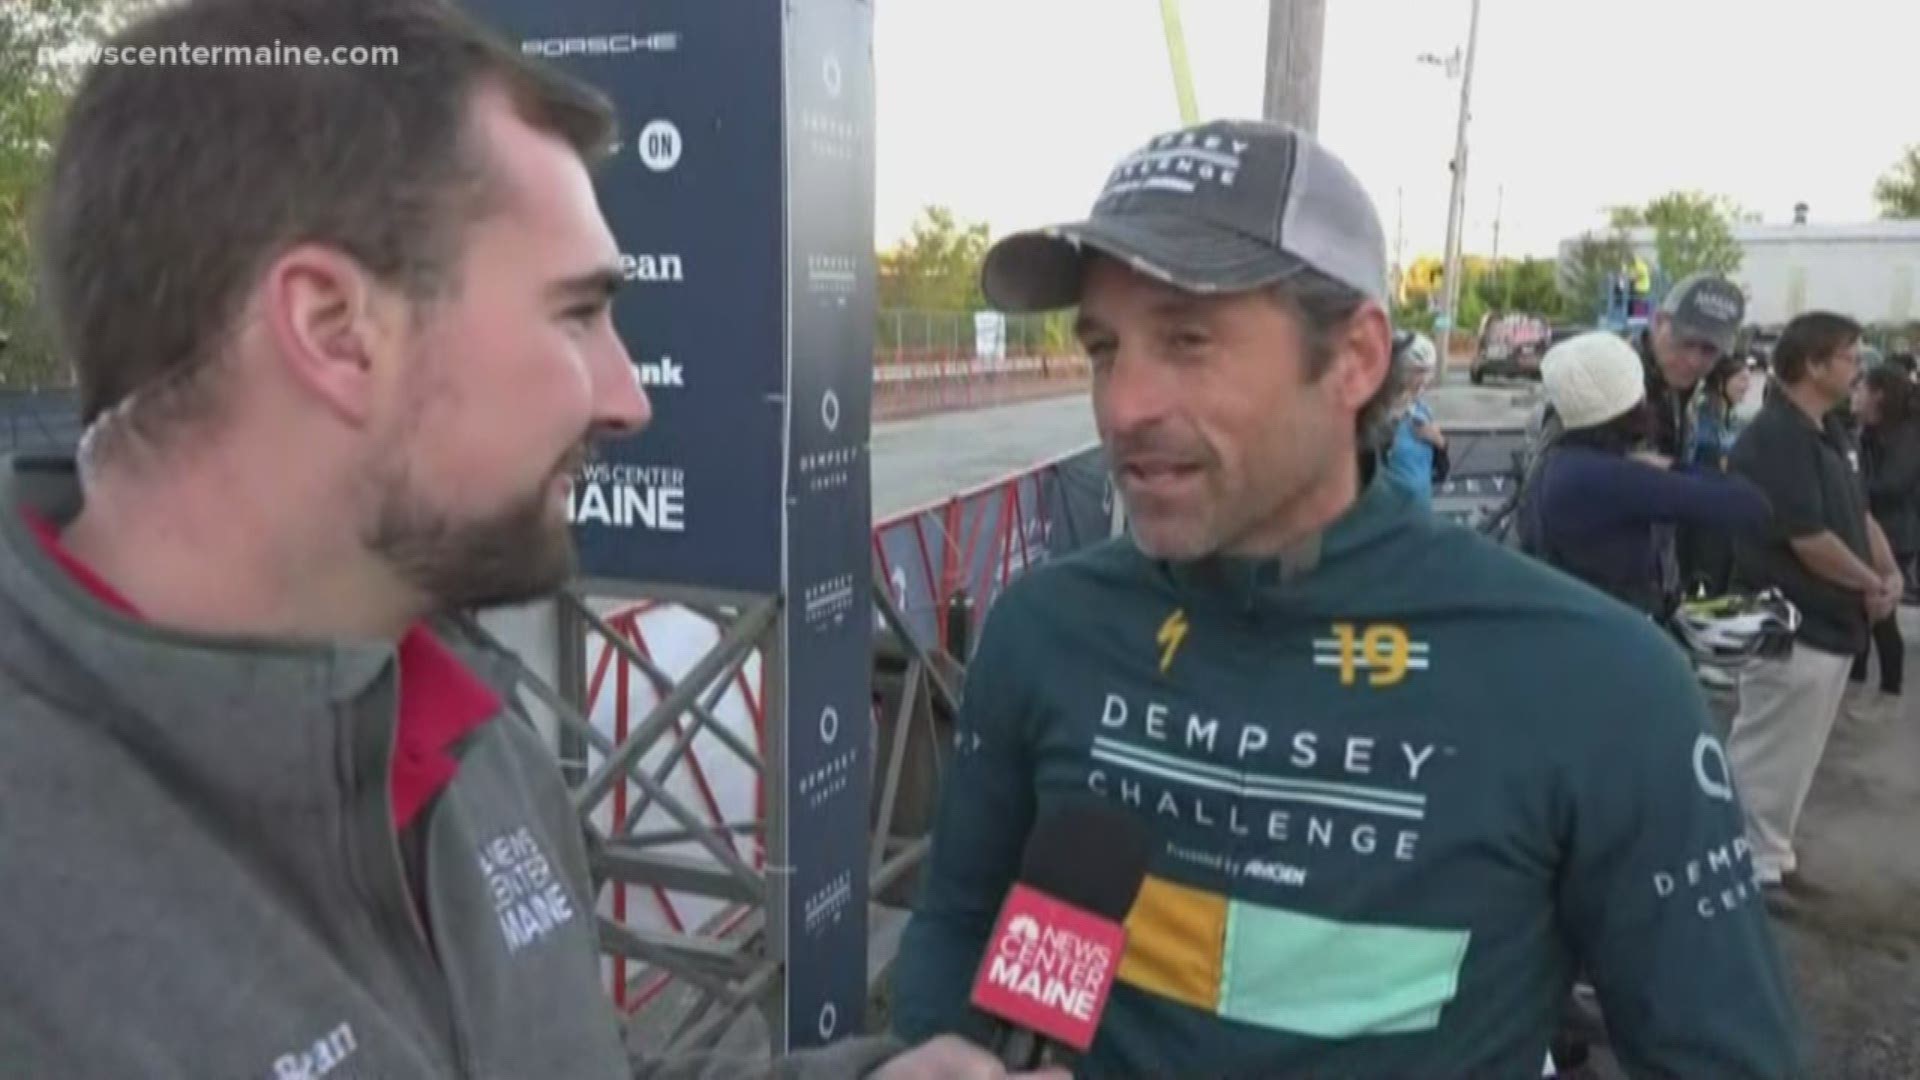 Patrick Dempsey gets ready for day two of the Dempsey Challenge. Sunday is bike riding day